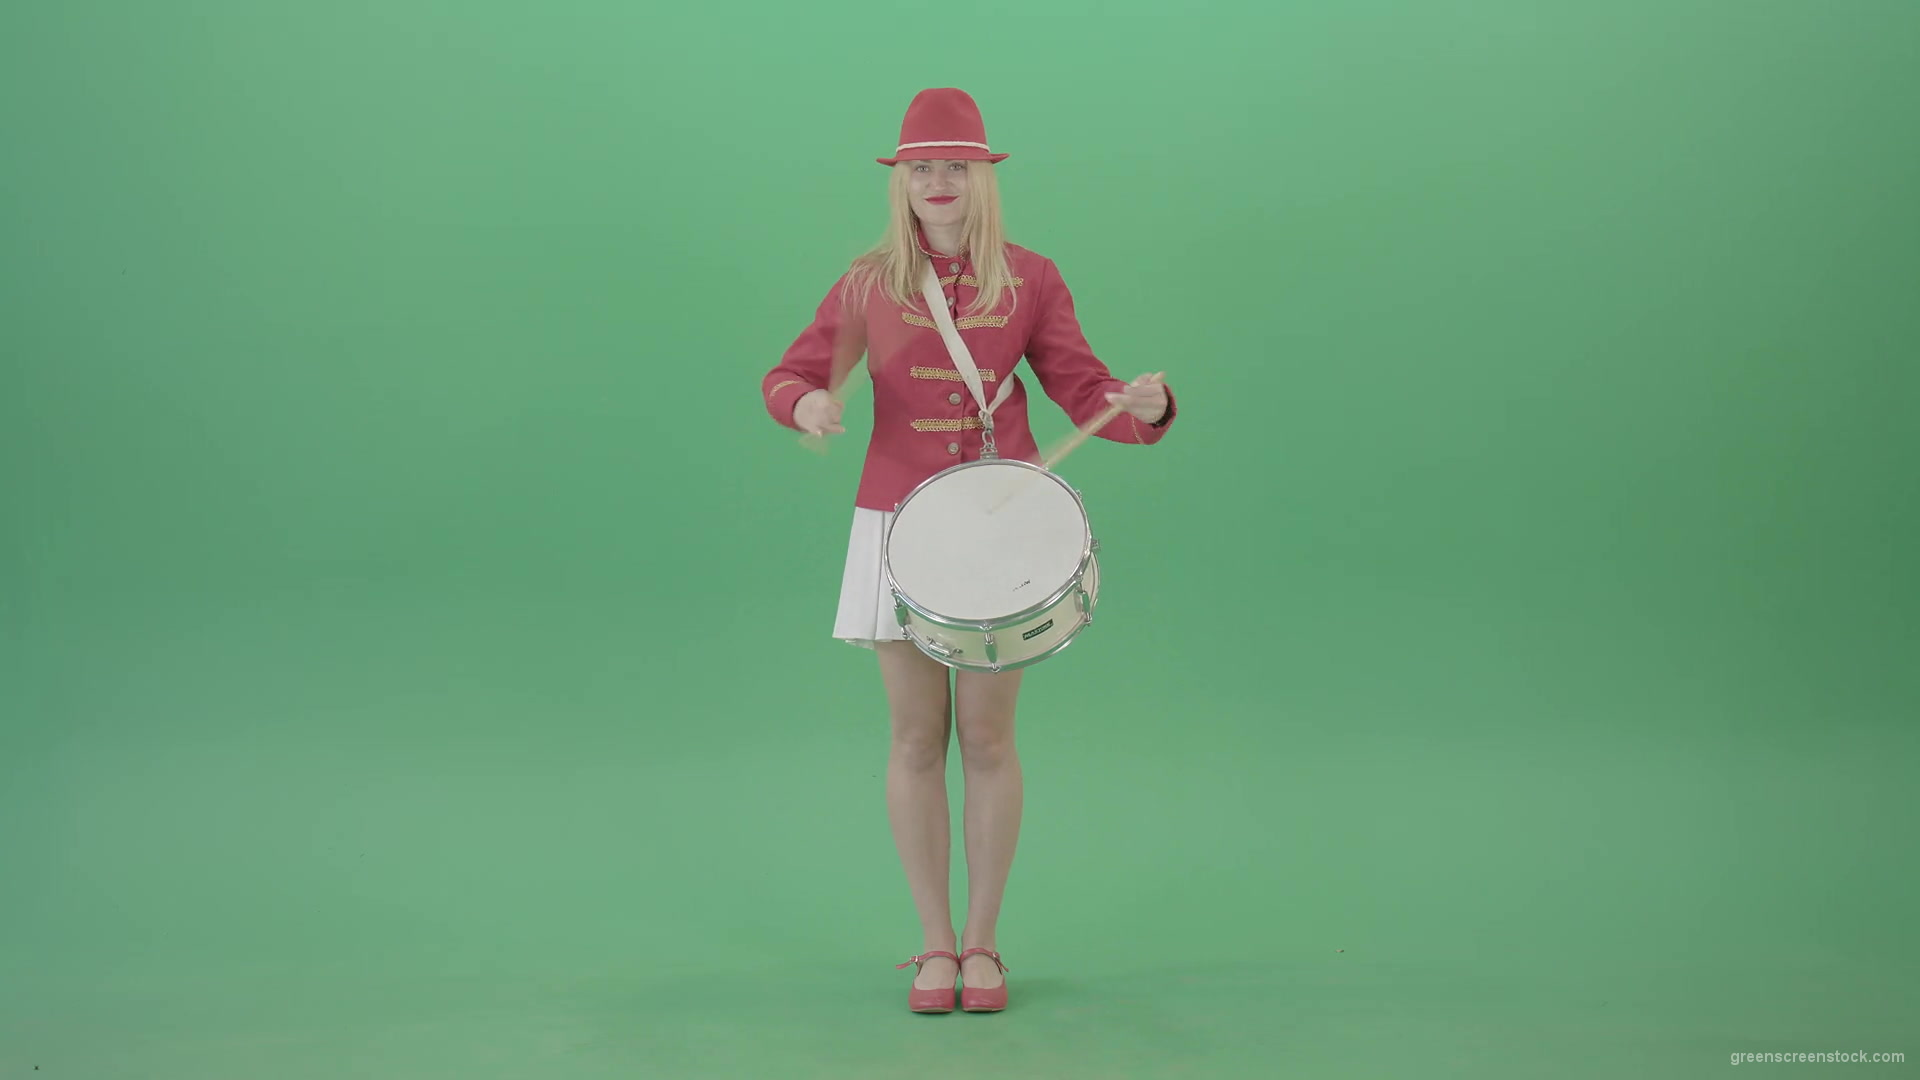 Girl-fast-playing-drum-music-instrument-isolated-on-Green-Background-4K-Video-Footage-1920_004 Green Screen Stock